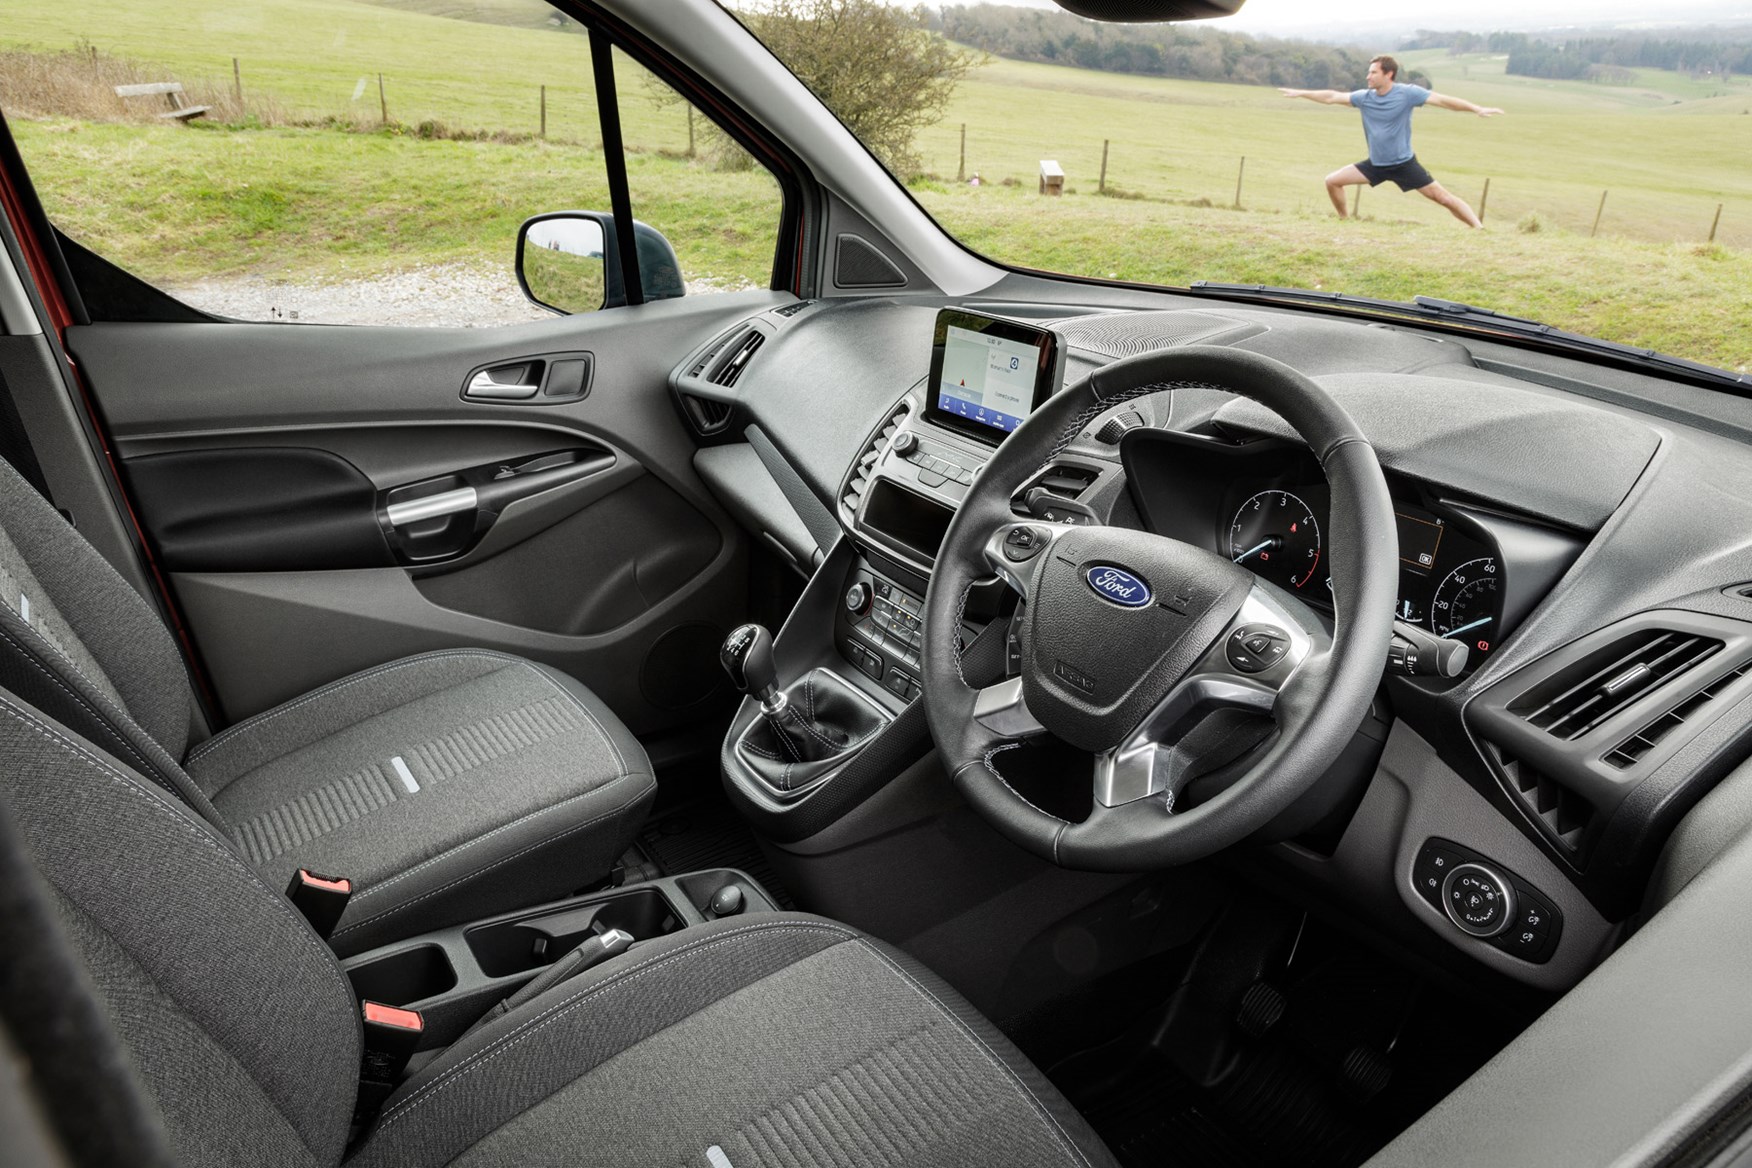 Ford Transit Connect Active review - cab interior with bloke doing yoga in the background